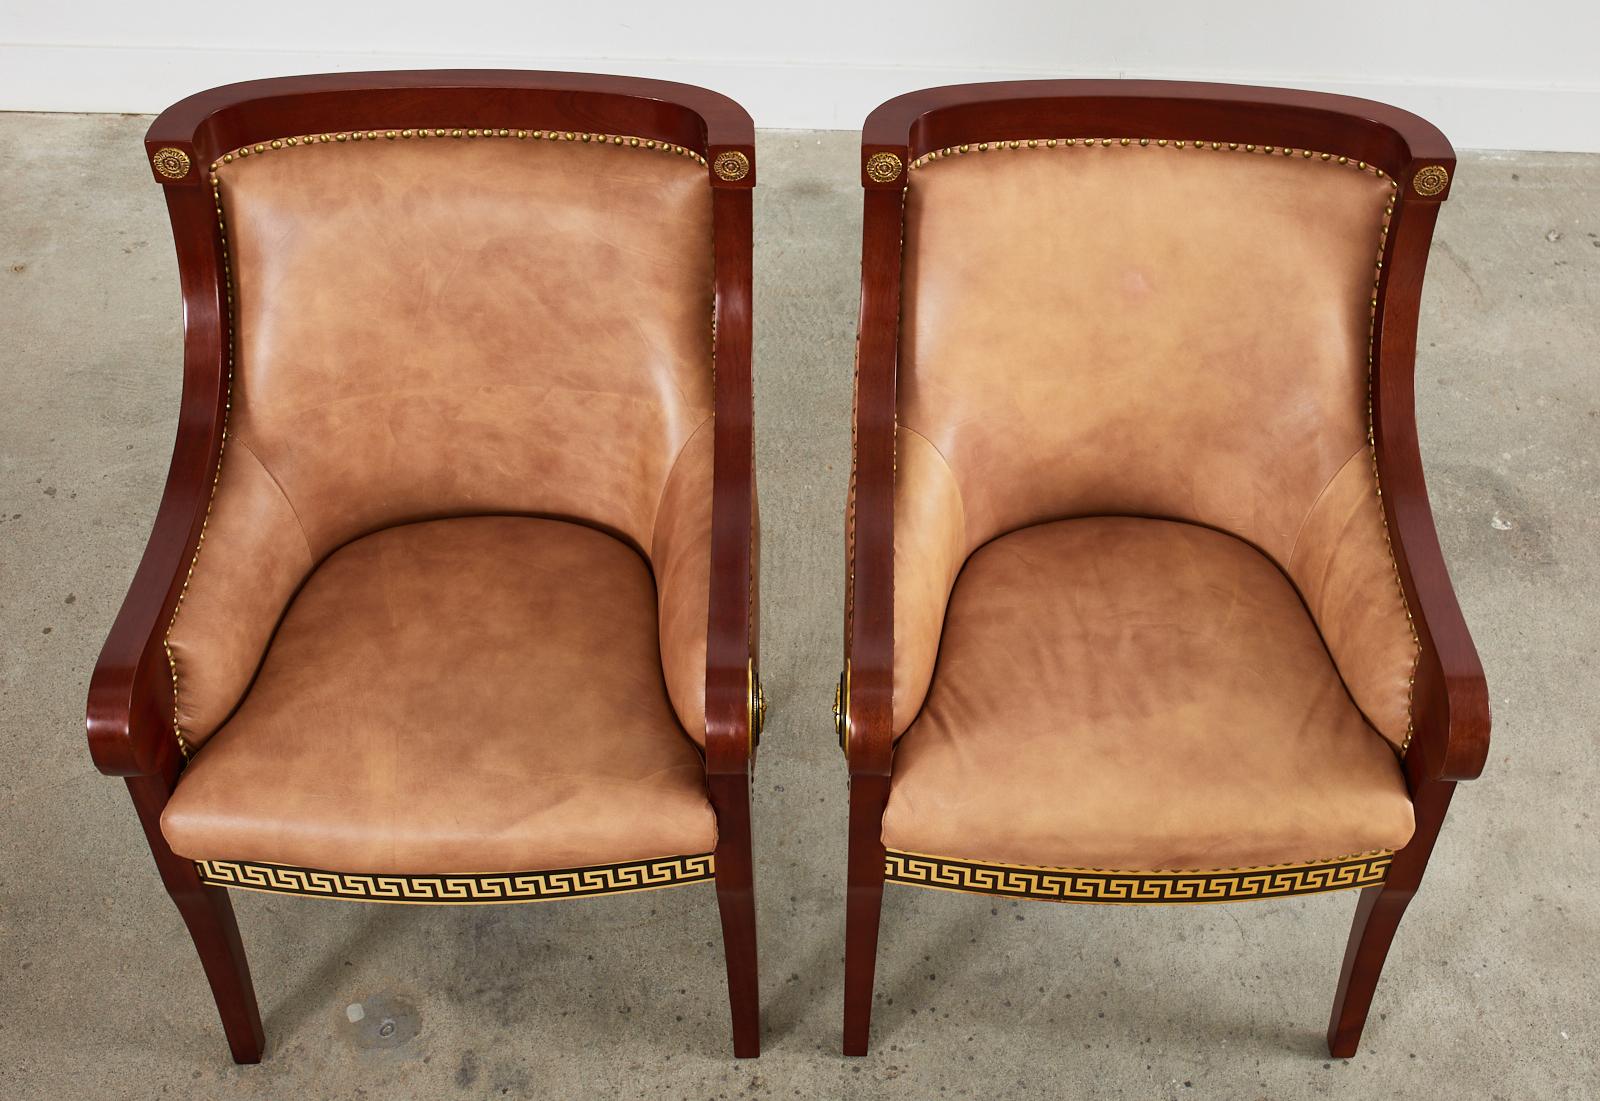 Pair of Empire Style Armchairs with Versacesque Decoration In Good Condition For Sale In Rio Vista, CA